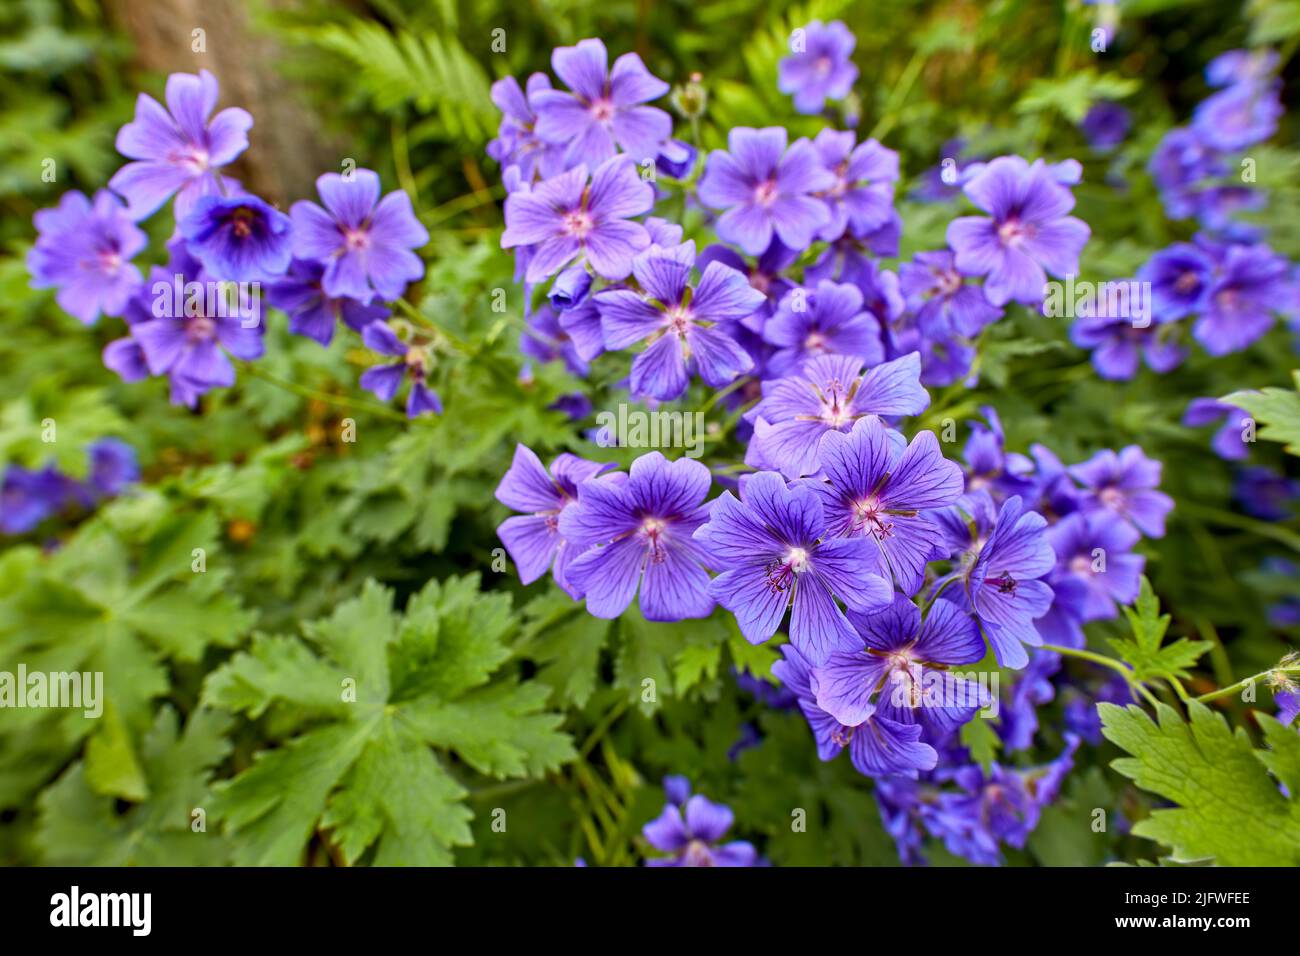 A bush of blue hardy geraniums in the backyard. Flowering bush of indigo flowers blooming in a botanical garden or backyard in spring outside Stock Photo